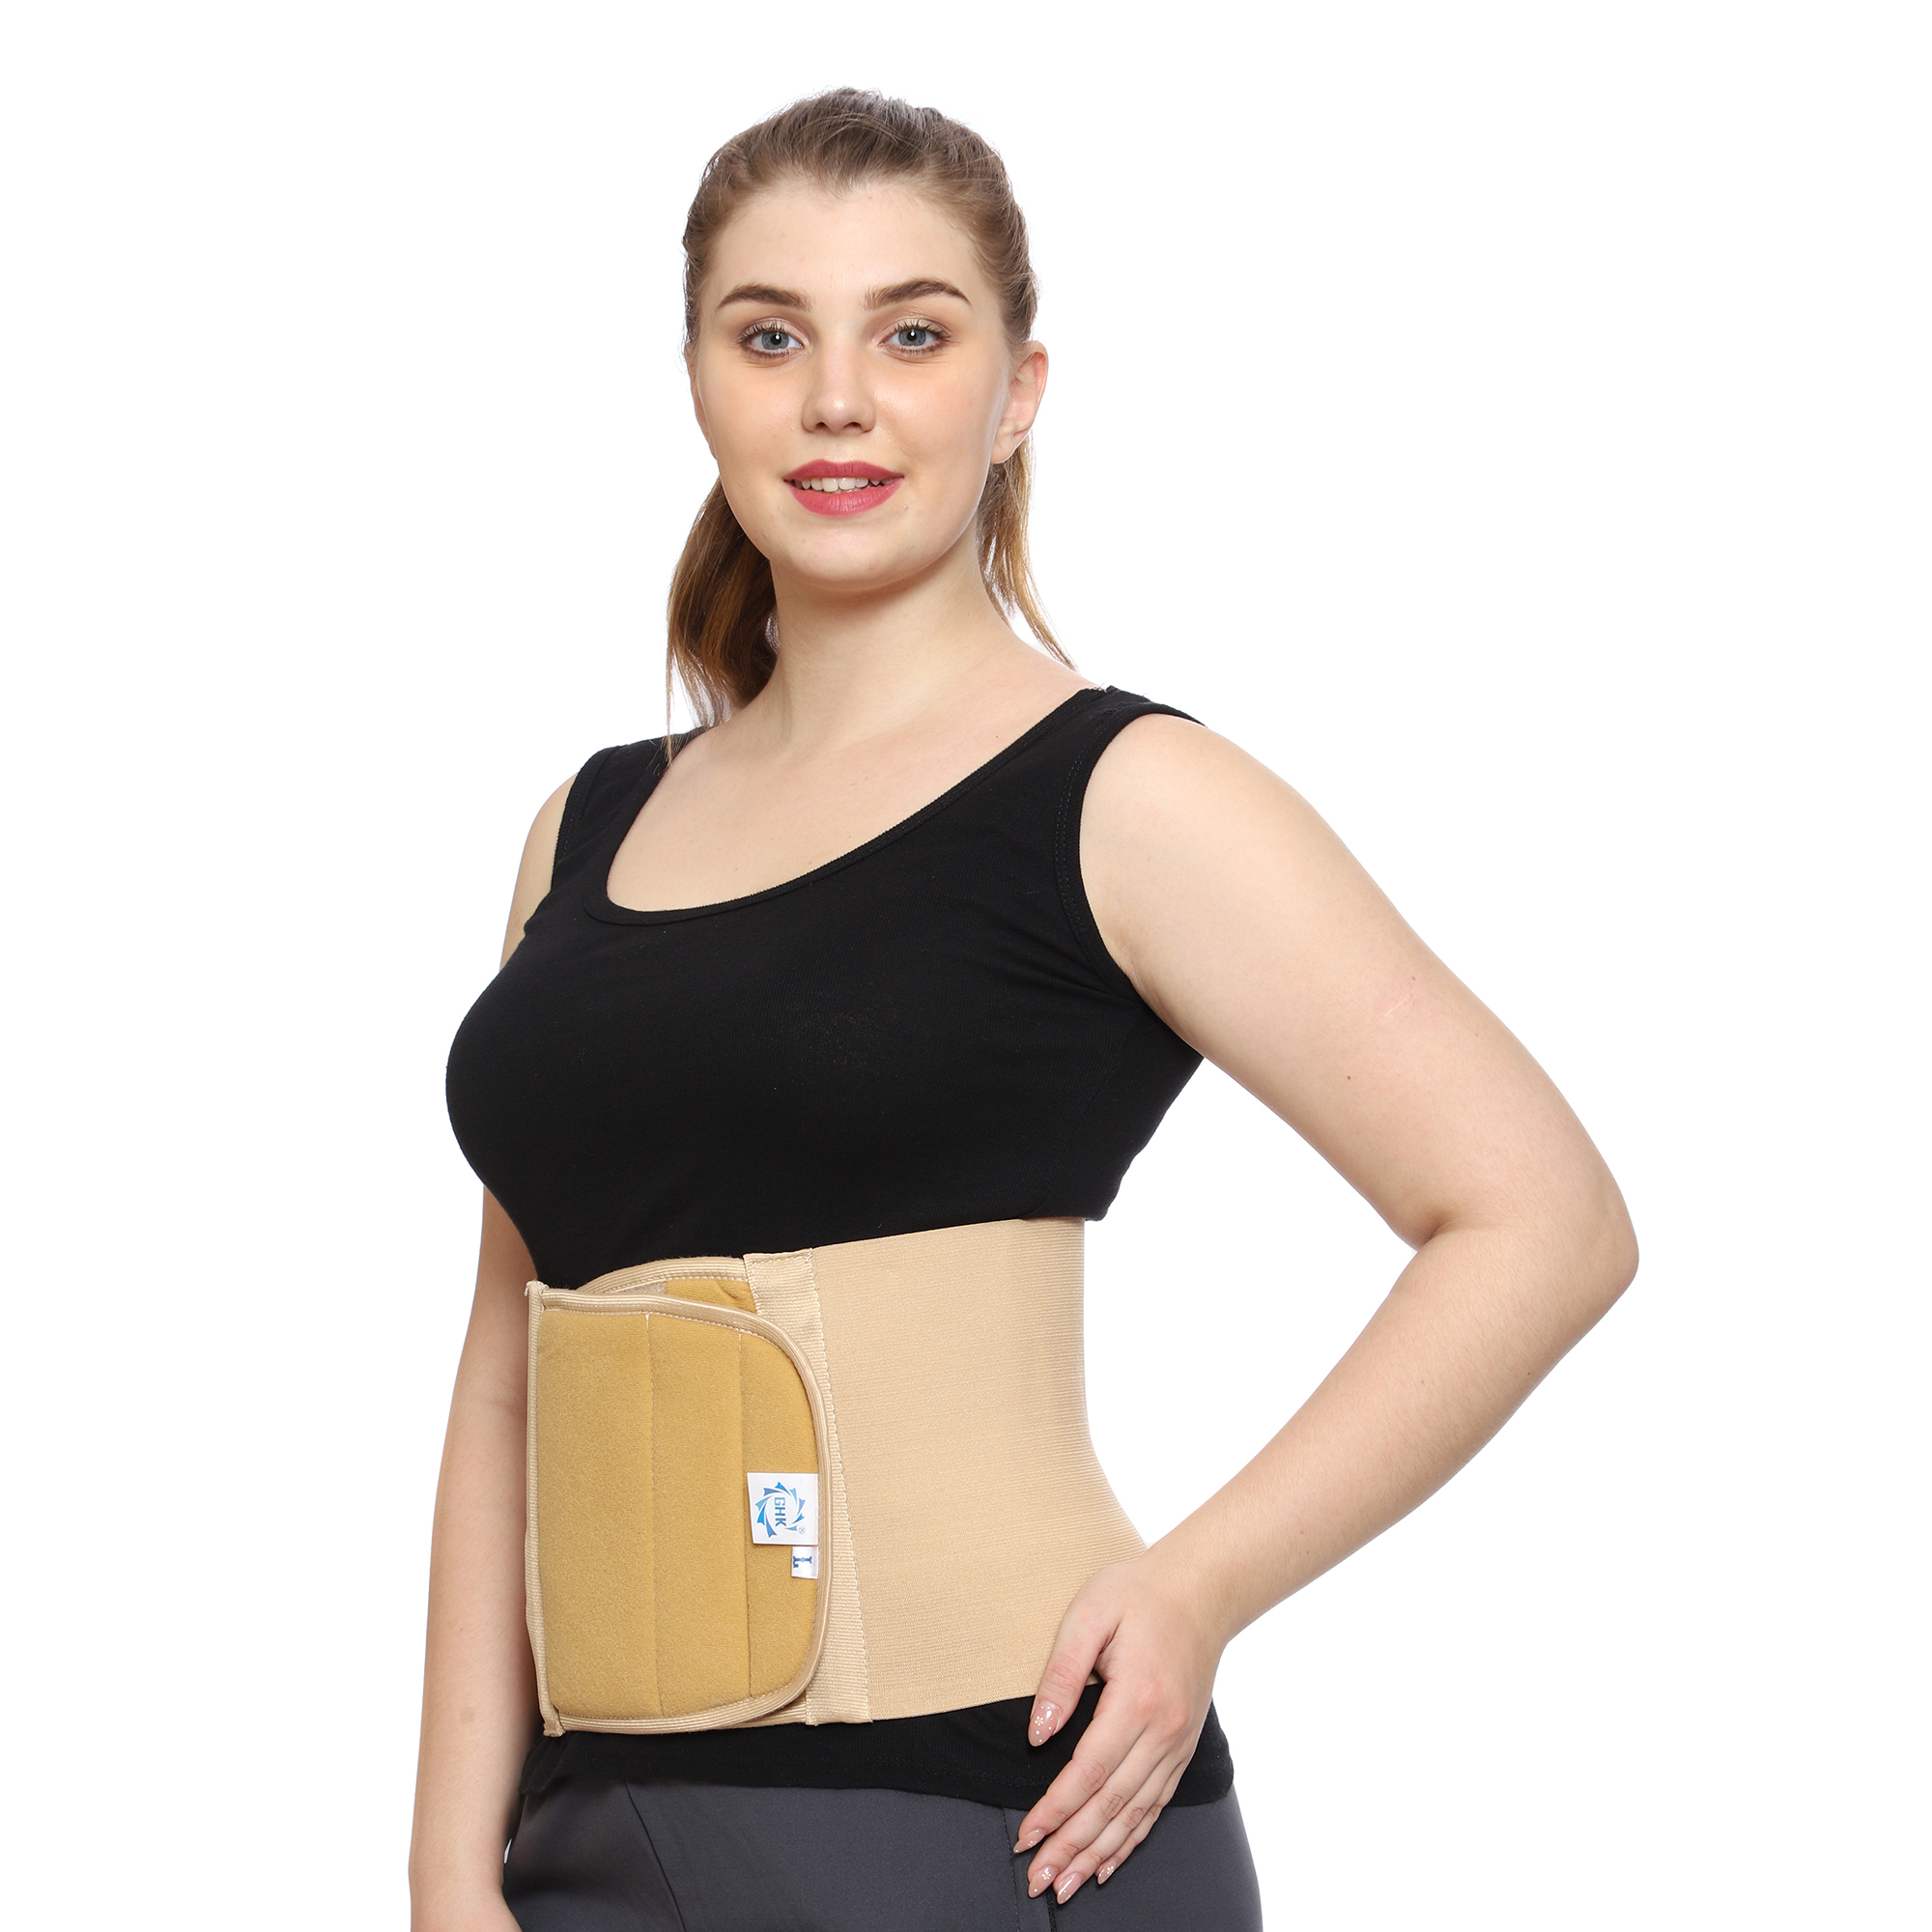 GHK S18 Abdominal Belt for Complete Back Support Multi Use Post